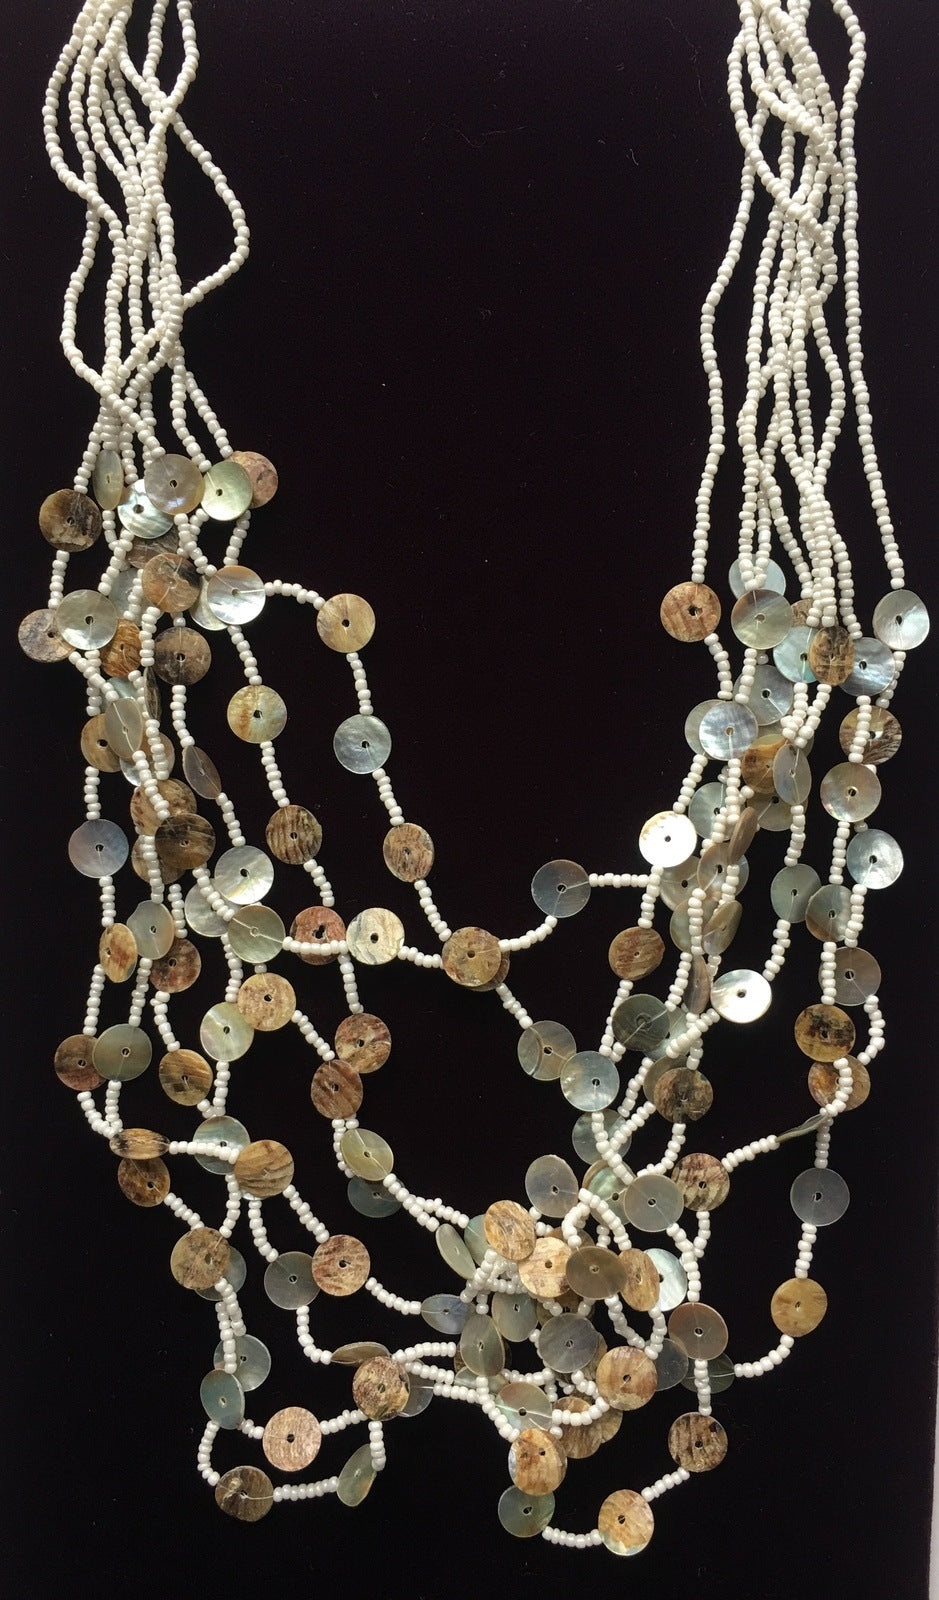 Nature Shell & Seed Beads Necklace Handcrafted Costume Jewelry